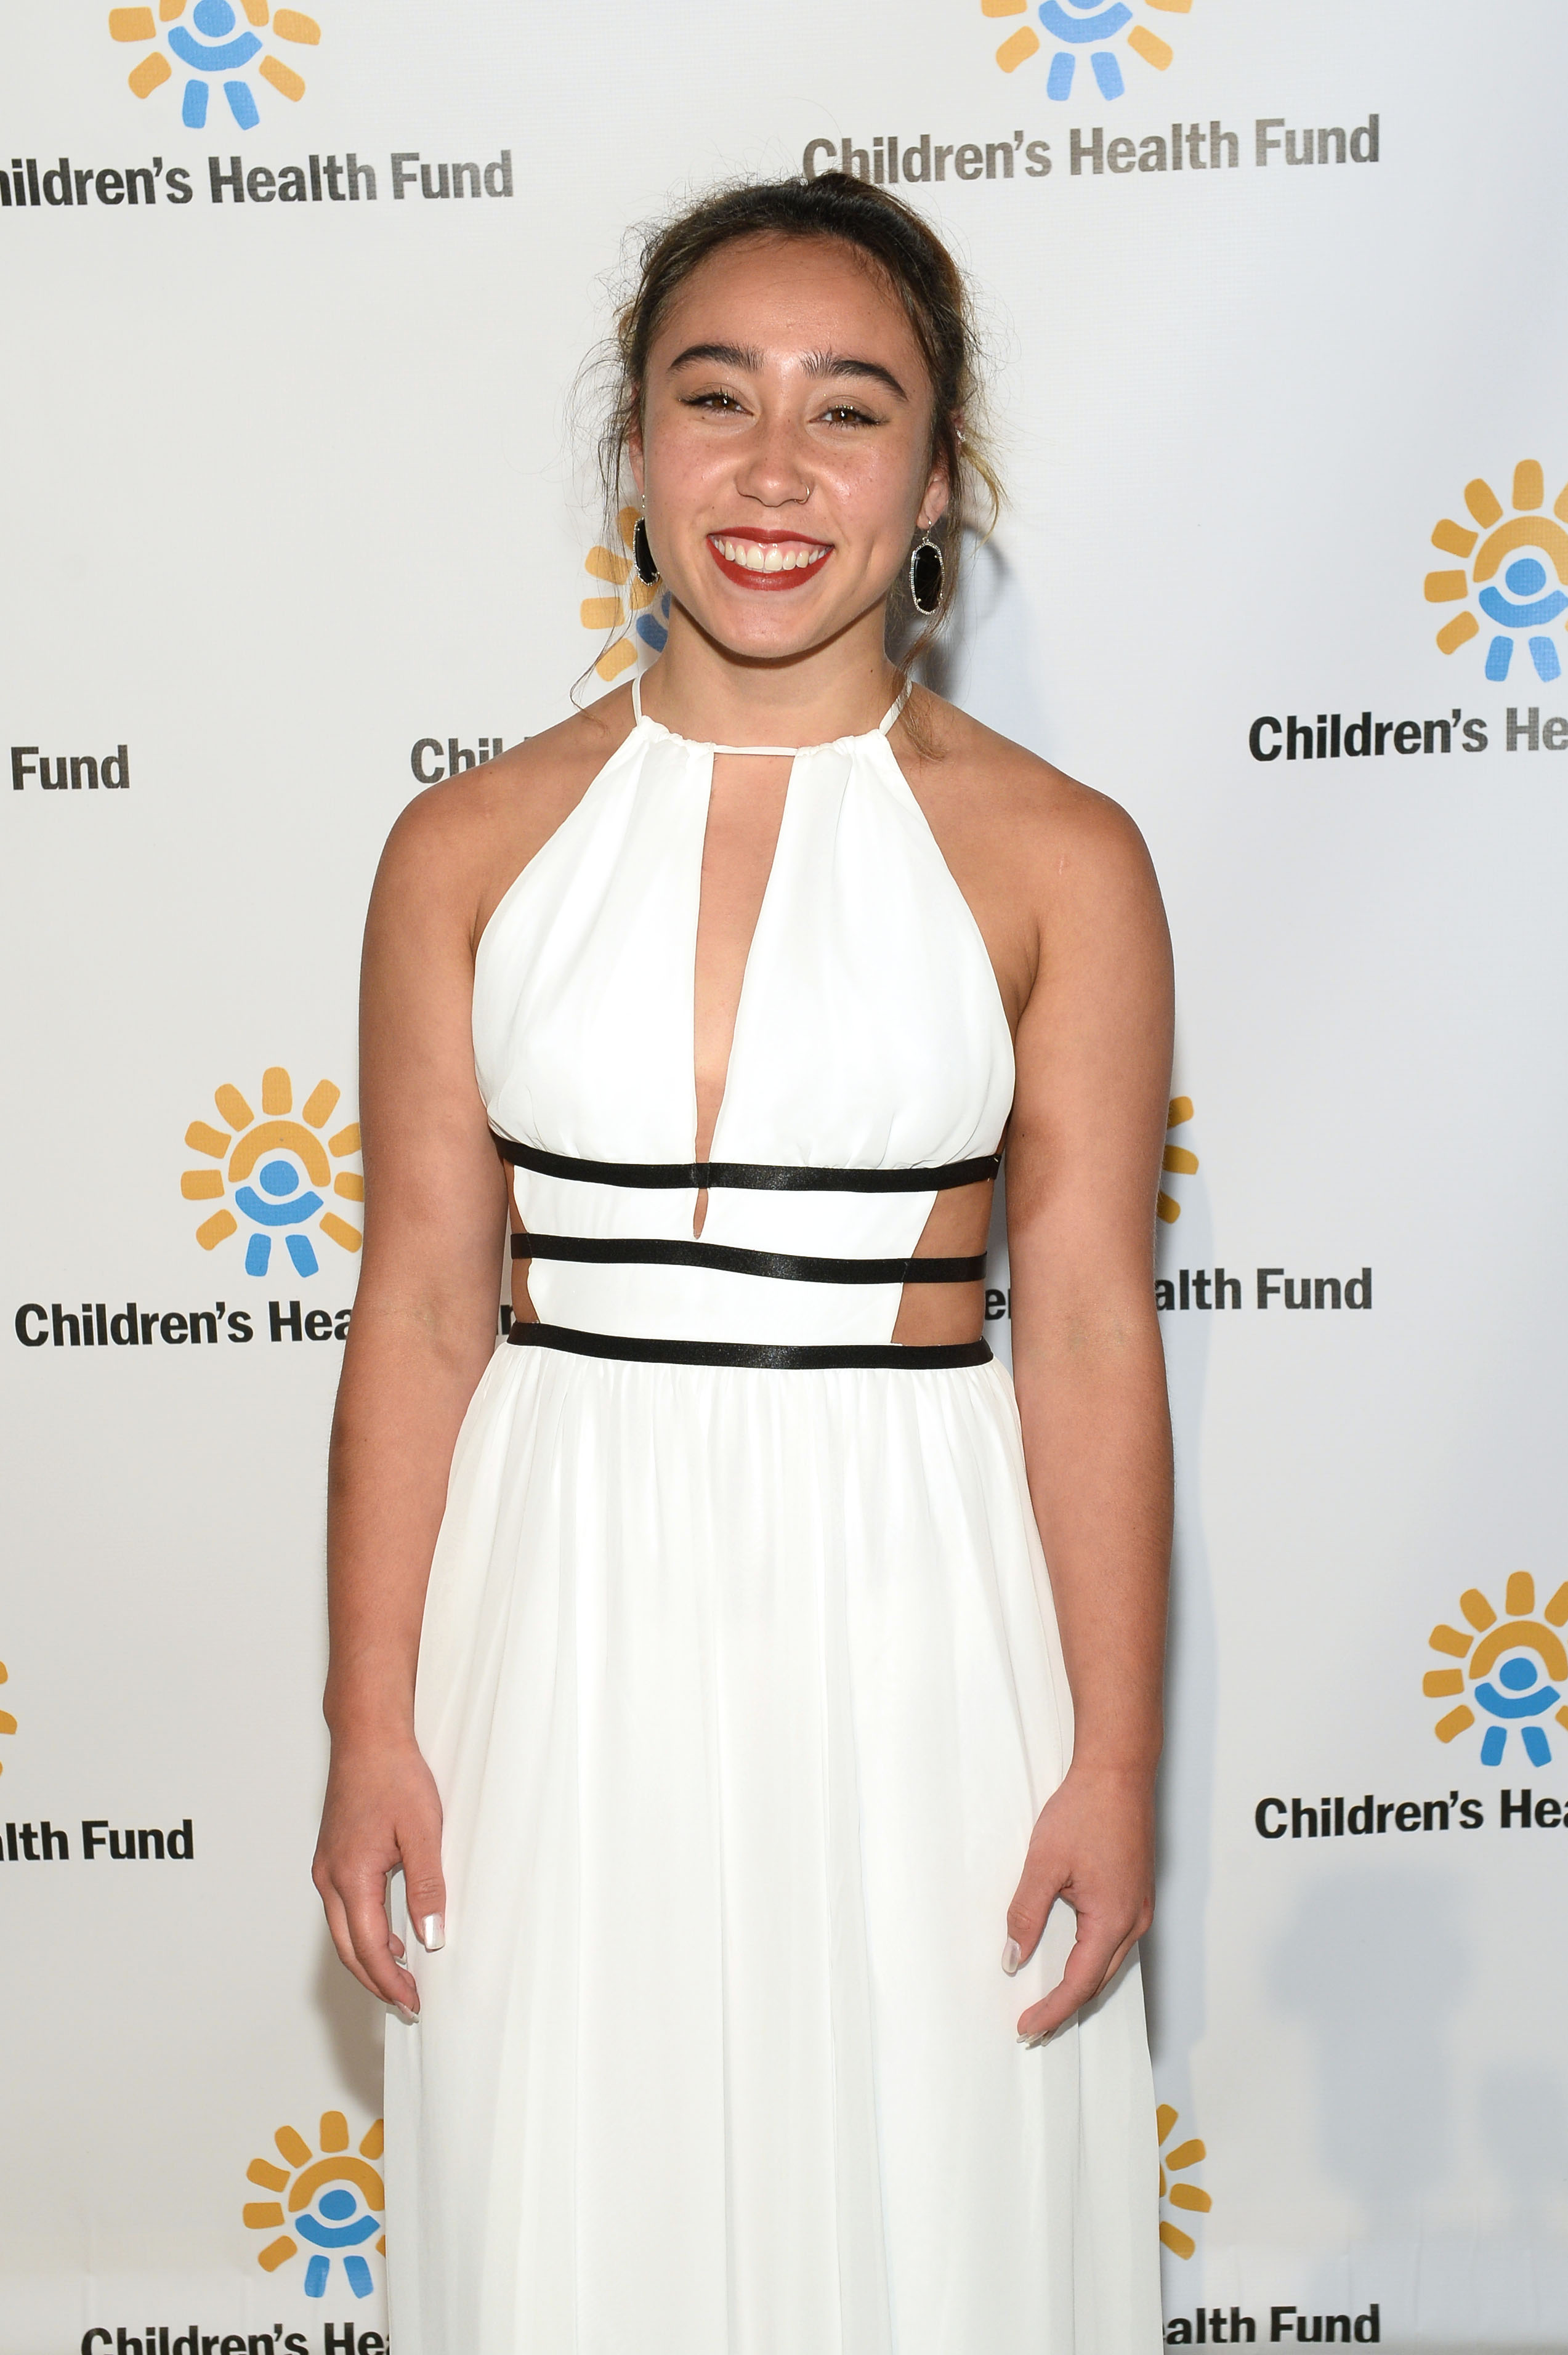 NEW YORK, NEW YORK - JUNE 05: Gymnast Katelyn Ohashi attends the Children's Health Fund Annual Benefit 2019 on June 05, 2019 in New York City. (Photo by Noam Galai/Getty Images for Children's Health Fund)